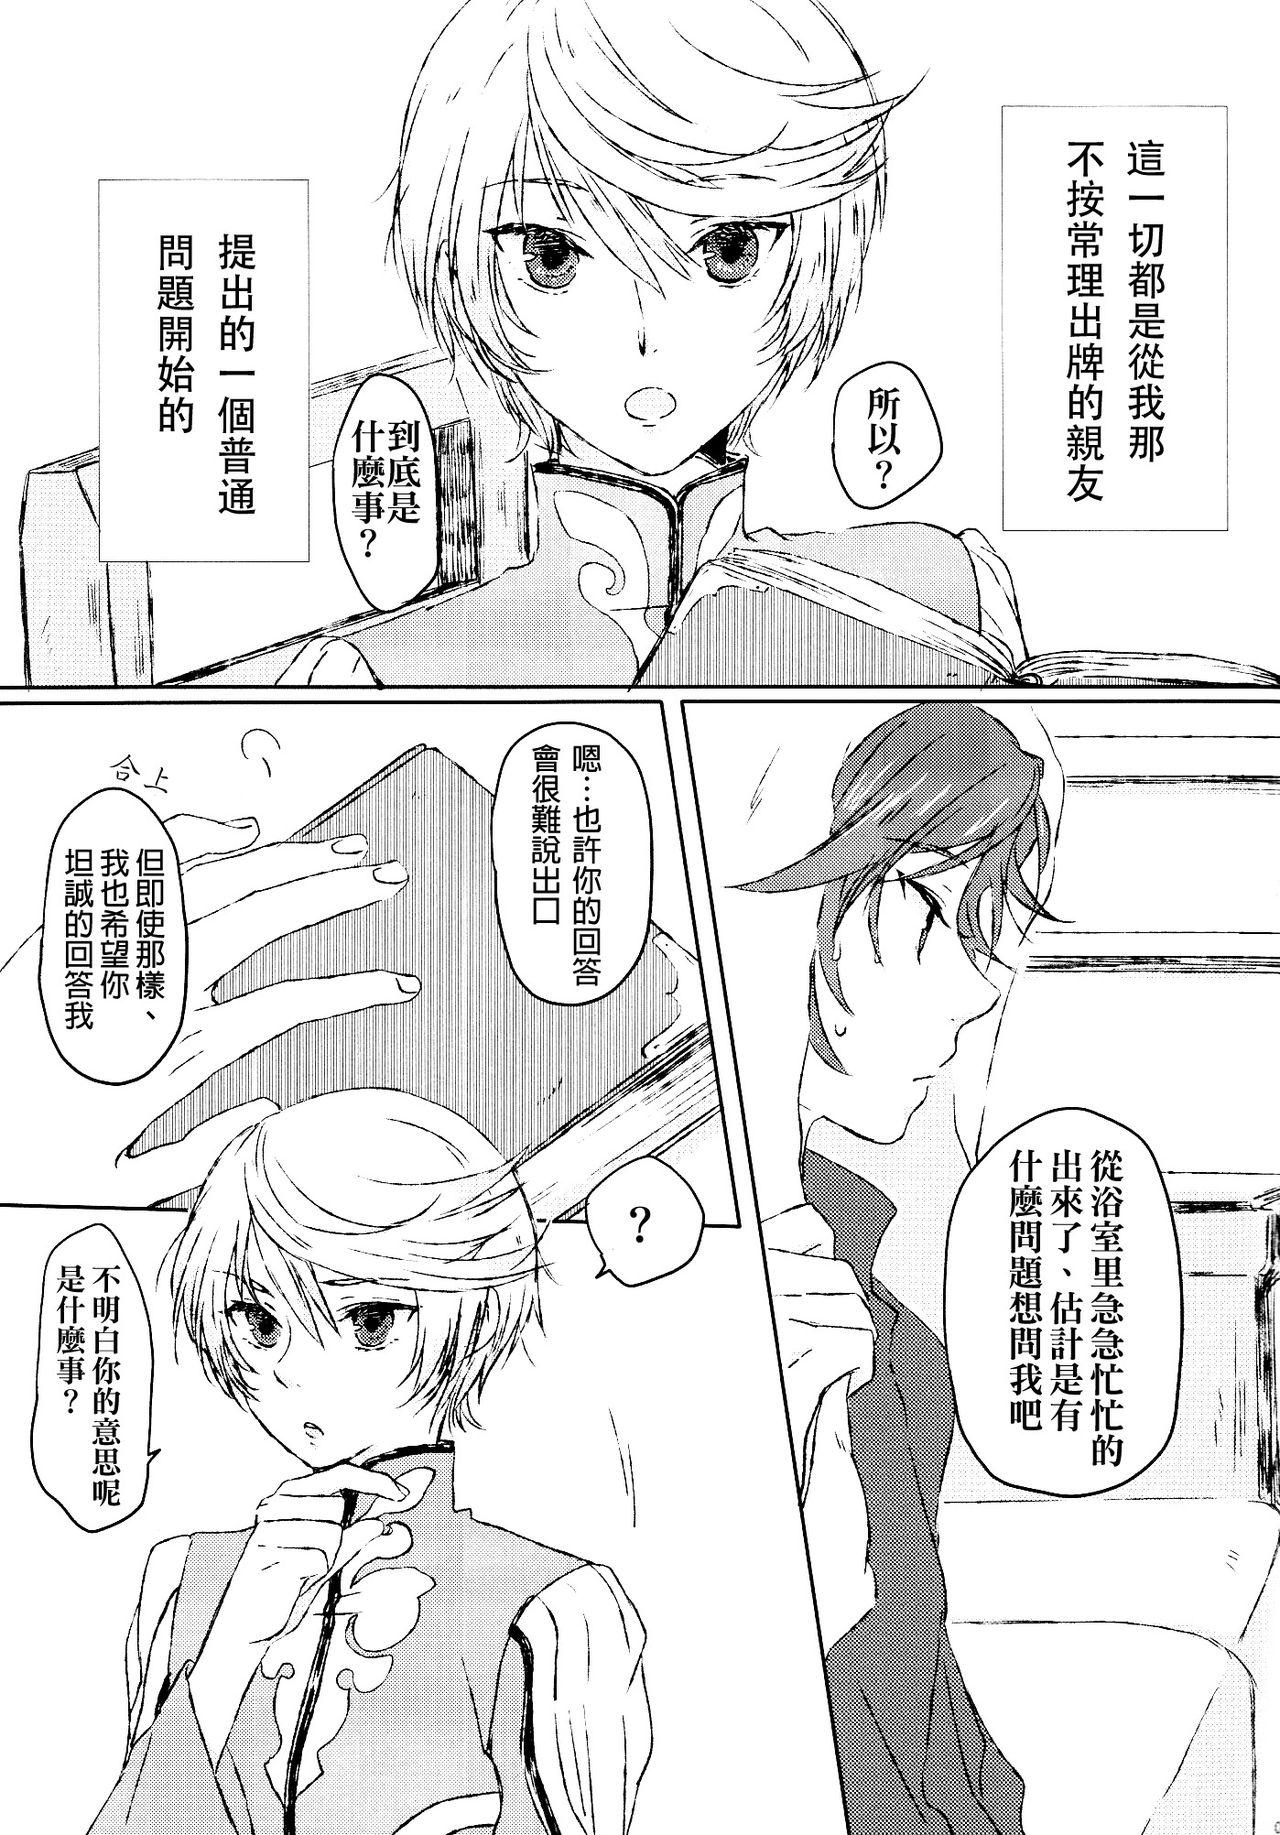 Emo Gay Chiguhagu Syndrome - Tales of zestiria Small - Page 5